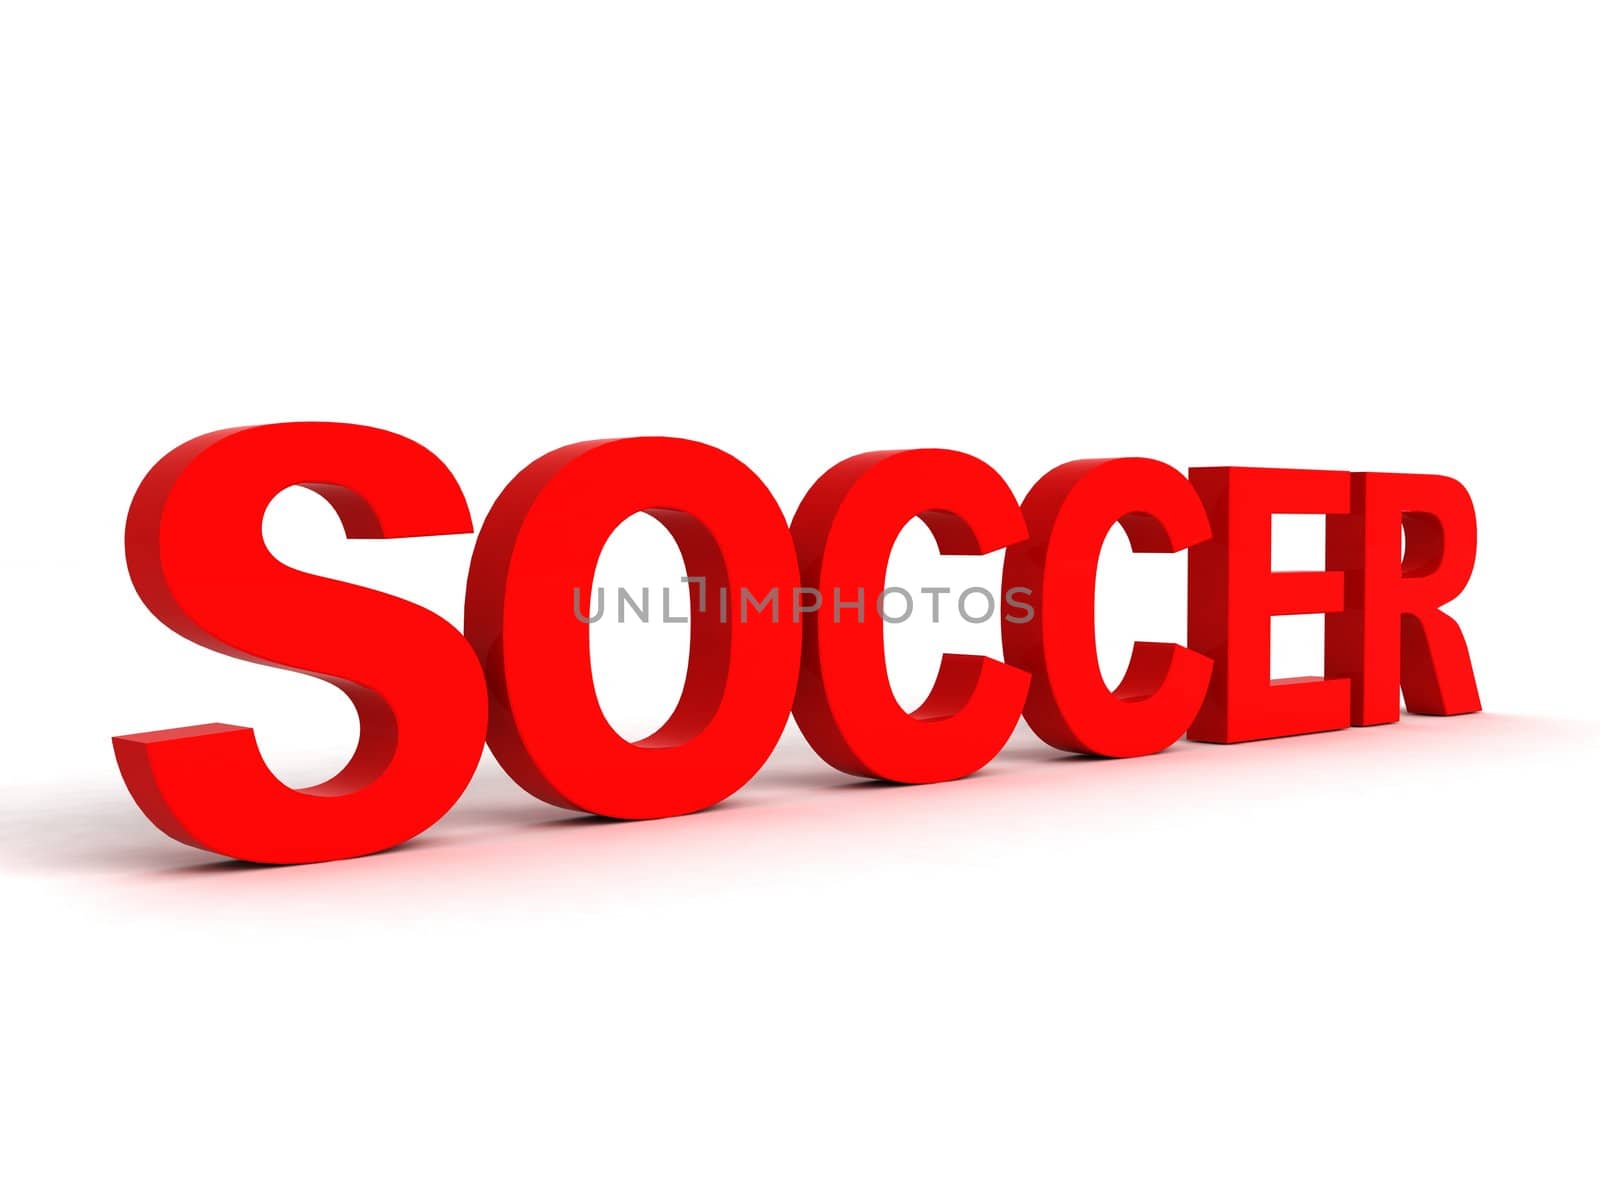 side view of three dimensional soccer word



